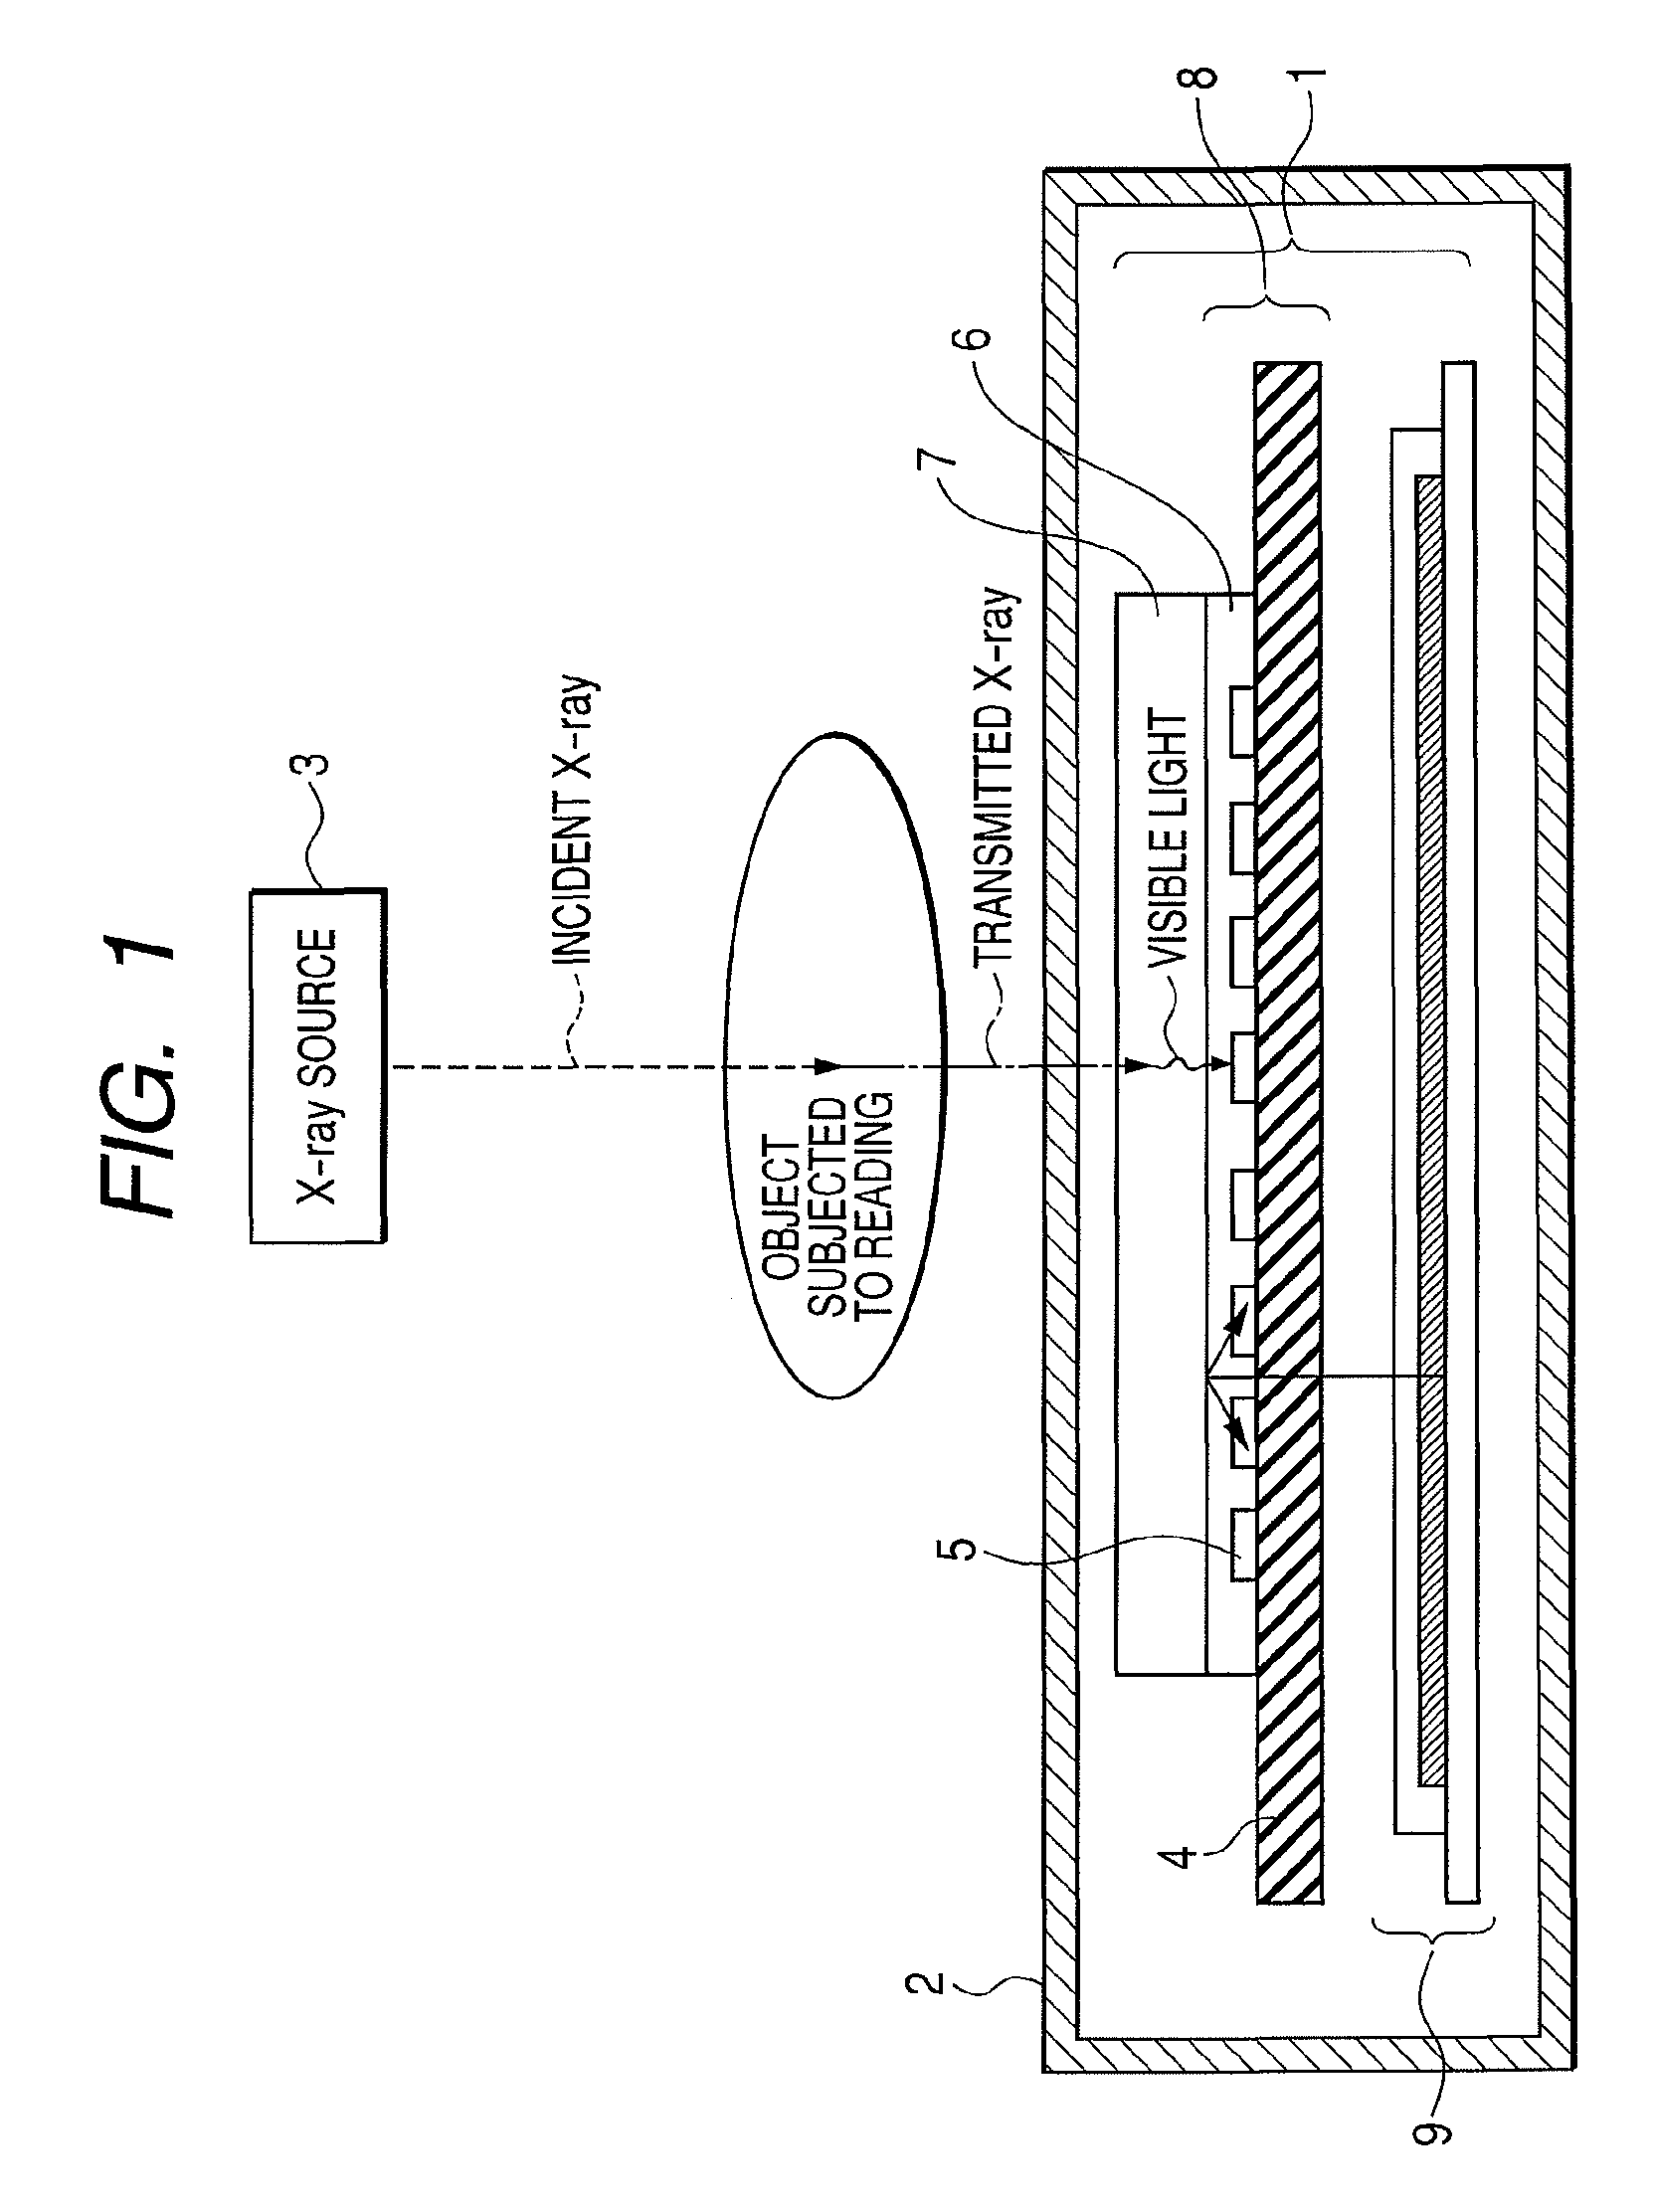 Radiation imaging apparatus and radiation imaging system having a light source with light for calibration of conversion elements